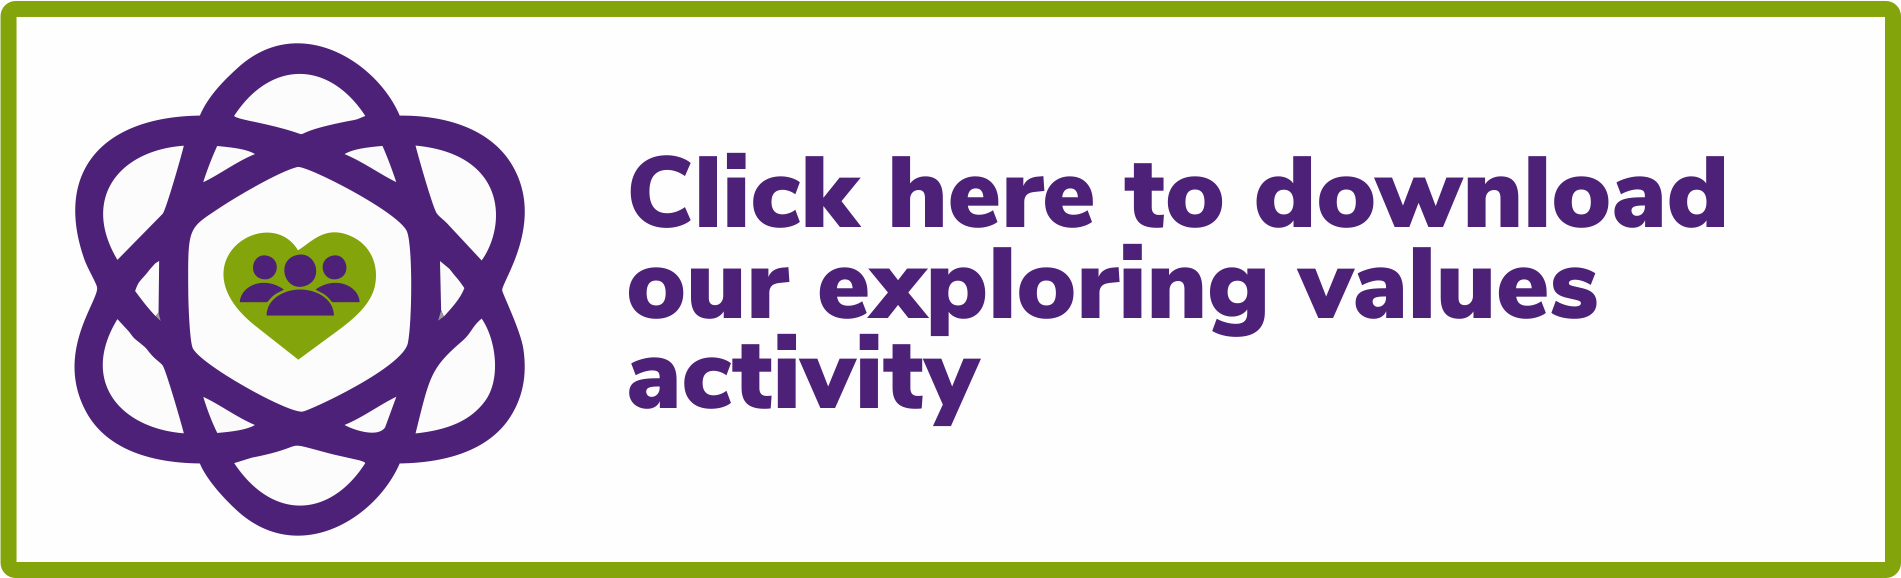 Click here to download our exploring values activity